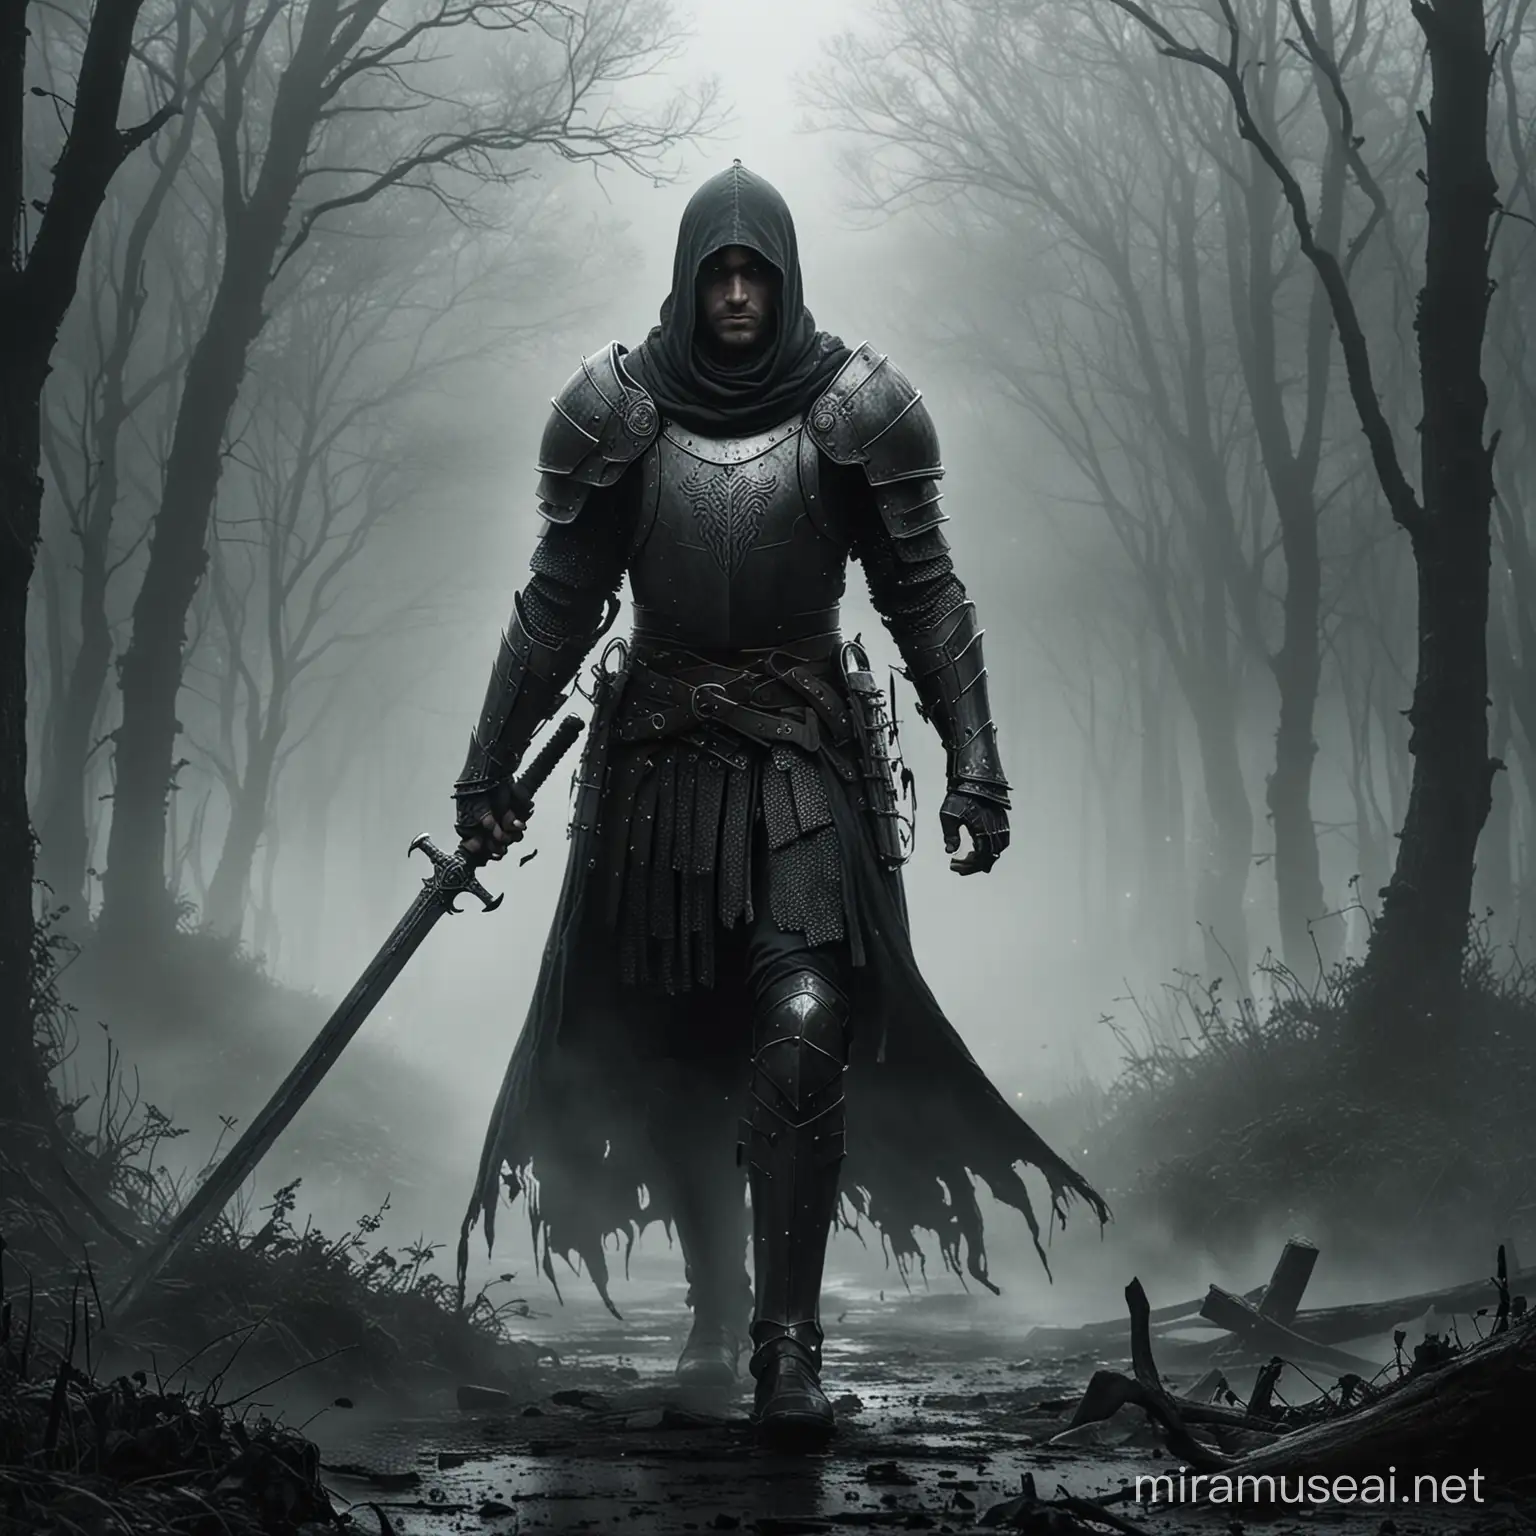 Envision yourself as a stalwart knight, adorned in armor wrought from the darkest depths of the soul, standing resolute amidst the swirling mists of an eerie realm.

As you tread through the murky haze, the weight of your armor presses against your shoulders, a constant reminder of the burdens you carry. Each step forward is a testament to your unwavering determination, your sword held aloft as a beacon of hope in the oppressive gloom.

Around you, the mist coils and twists, obscuring your vision and distorting your senses. Shadows dance upon the edges of your perception, whispering secrets of forgotten realms and ancient curses. Yet you press on, guided by an inner resolve that refuses to yield to the encroaching darkness.

In this mist-shrouded domain, danger lurks at every turn. Twisted creatures emerge from the depths of the fog, their eyes gleaming with malice as they set upon you with savage ferocity. But you are no stranger to battle, and with each clash of steel, you prove yourself worthy of the title you bear.

Amidst the chaos and uncertainty, there are moments of fleeting clarity: the glint of moonlight upon your polished helm, the echo of distant footsteps fading into the mist. And though the path ahead may be fraught with peril, you remain undaunted, for you are a knight born of steel and shadow, destined to pierce the veil of darkness and emerge victorious on the other side.